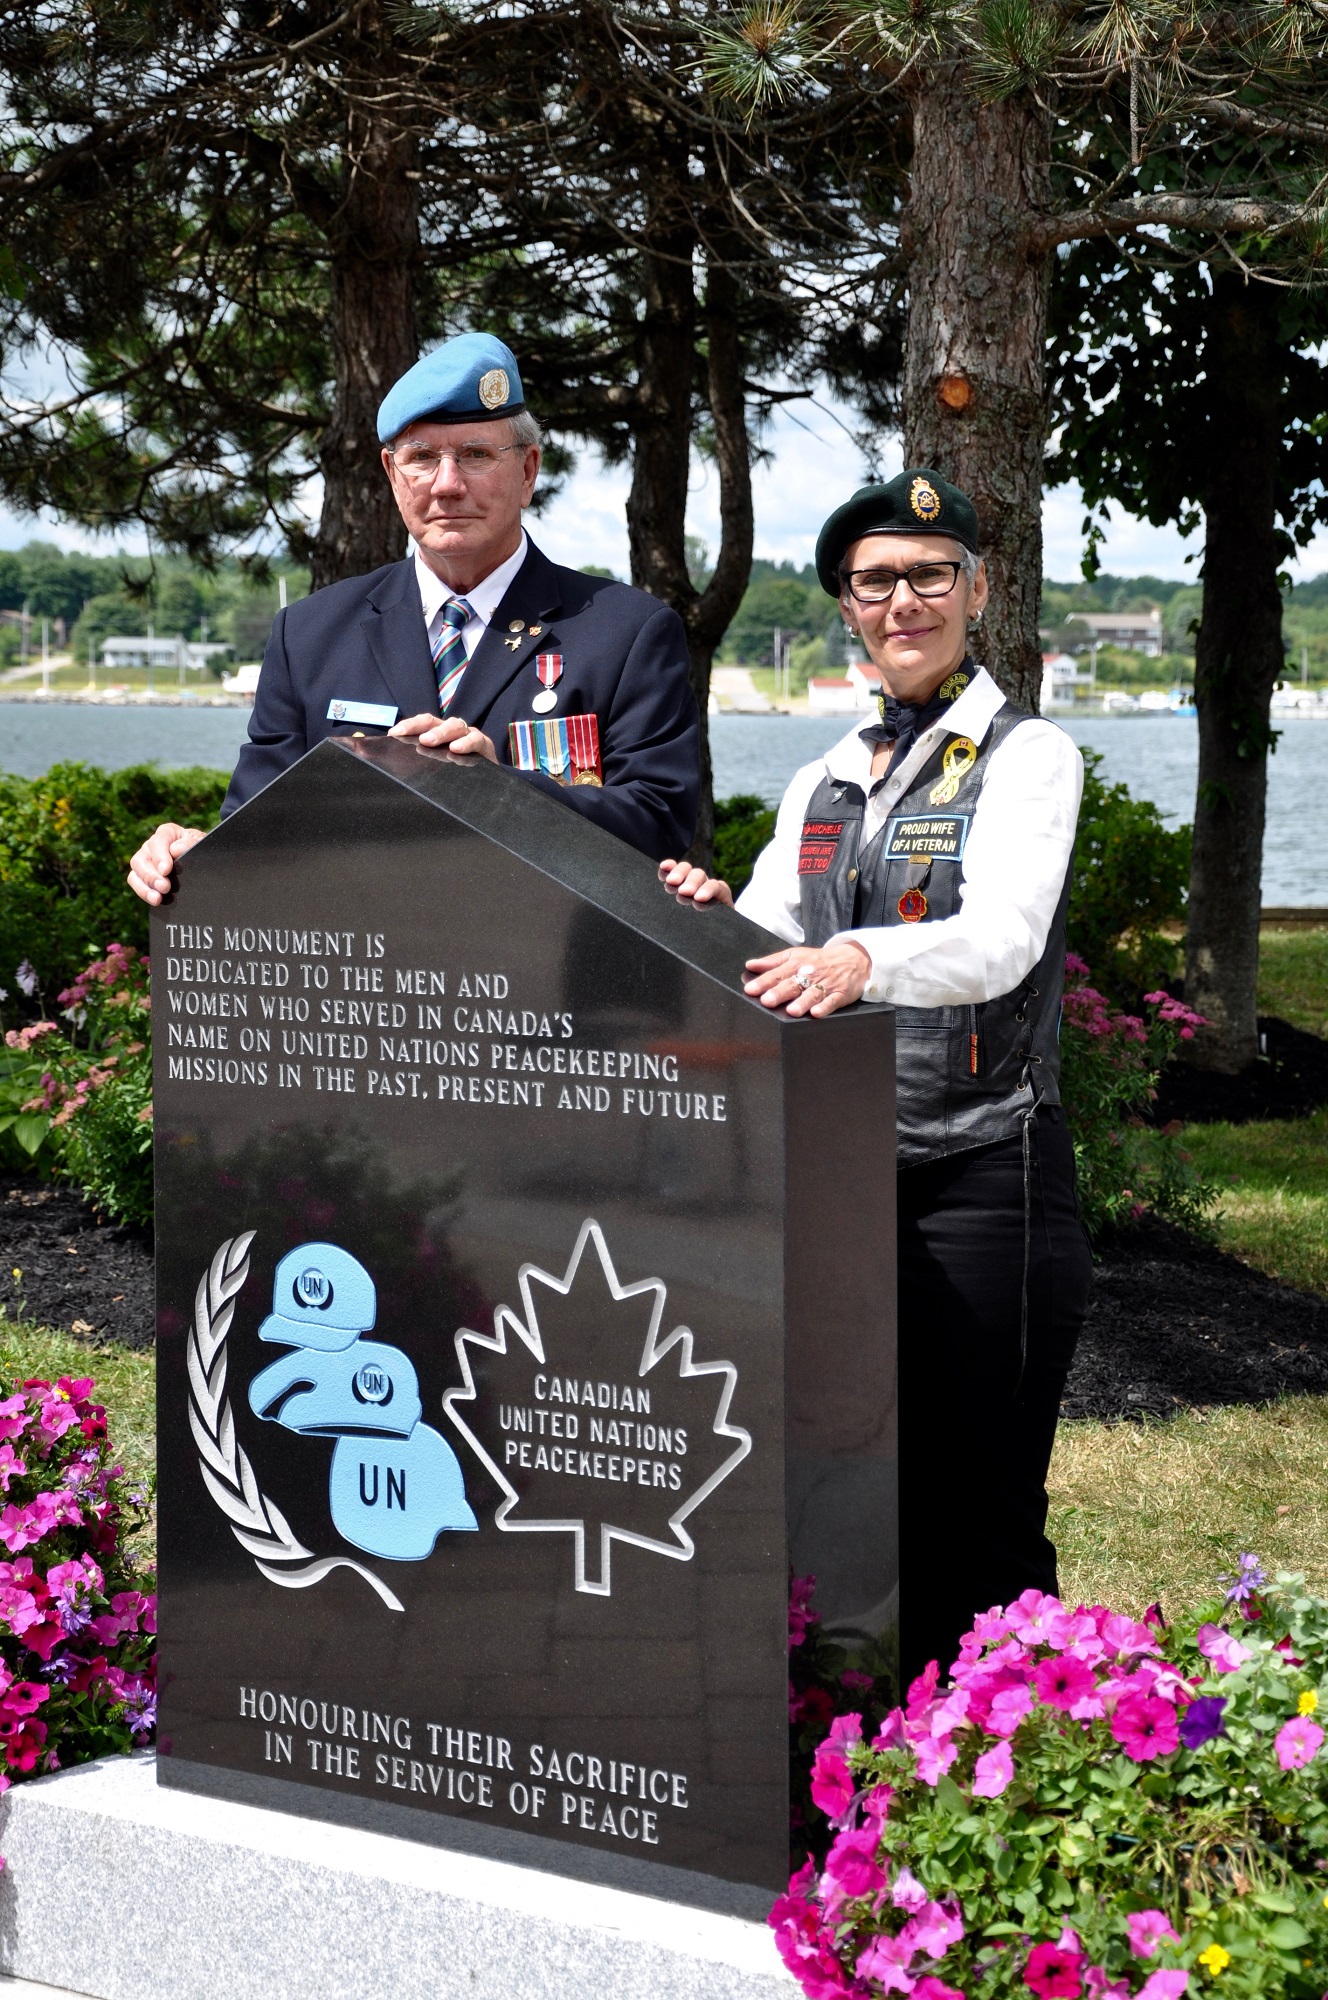 Designer Michele Gardiner and her husband peacekeeping Veteran Don Gardiner with the Peacekeepers Monument.